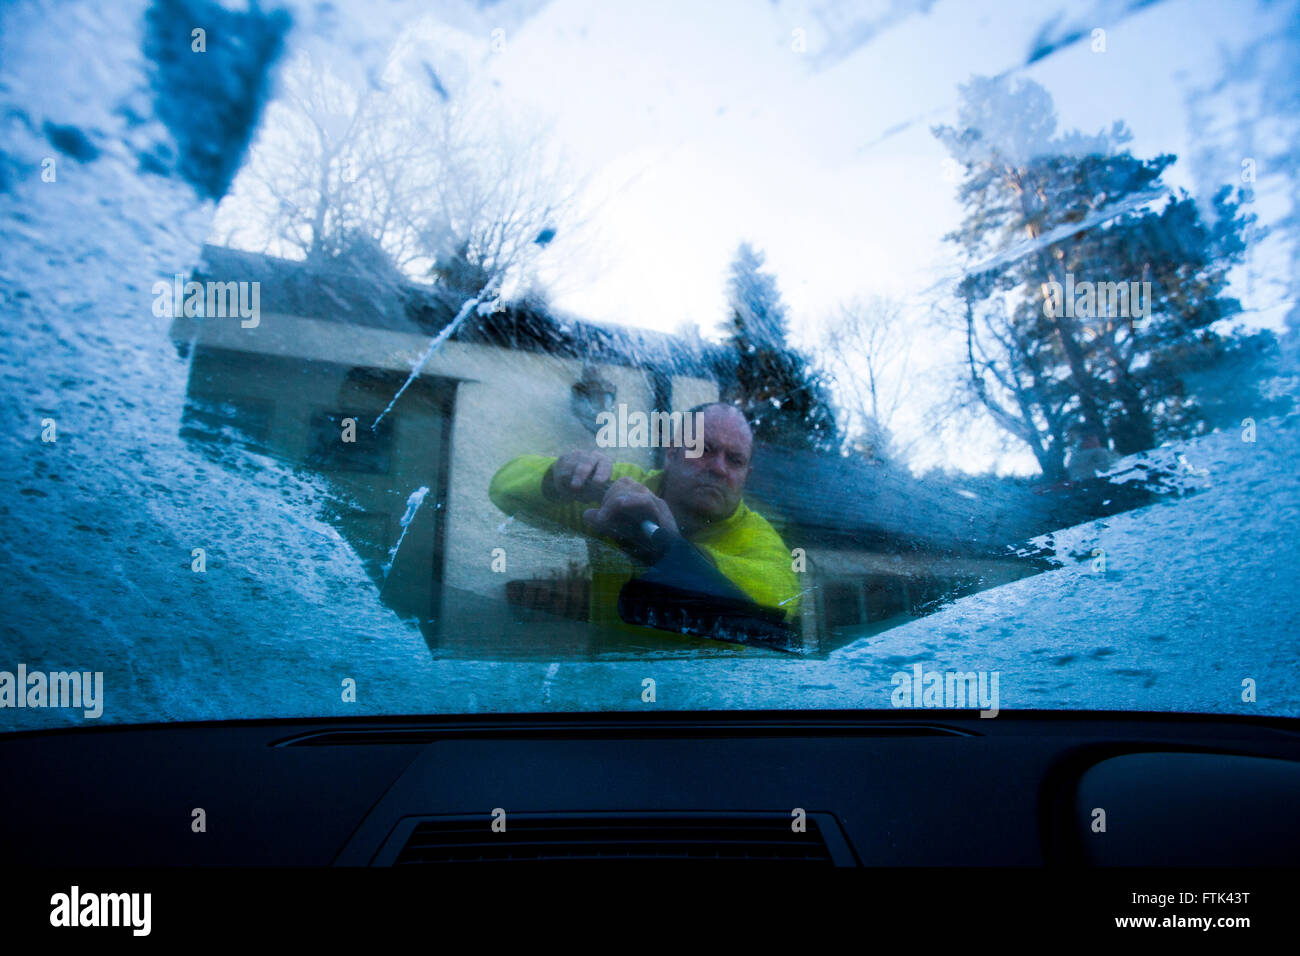 Person scraping ice off windscreen with camera placed inside car looking out towards person scraping, Flintshire, Wales, UK Stock Photo